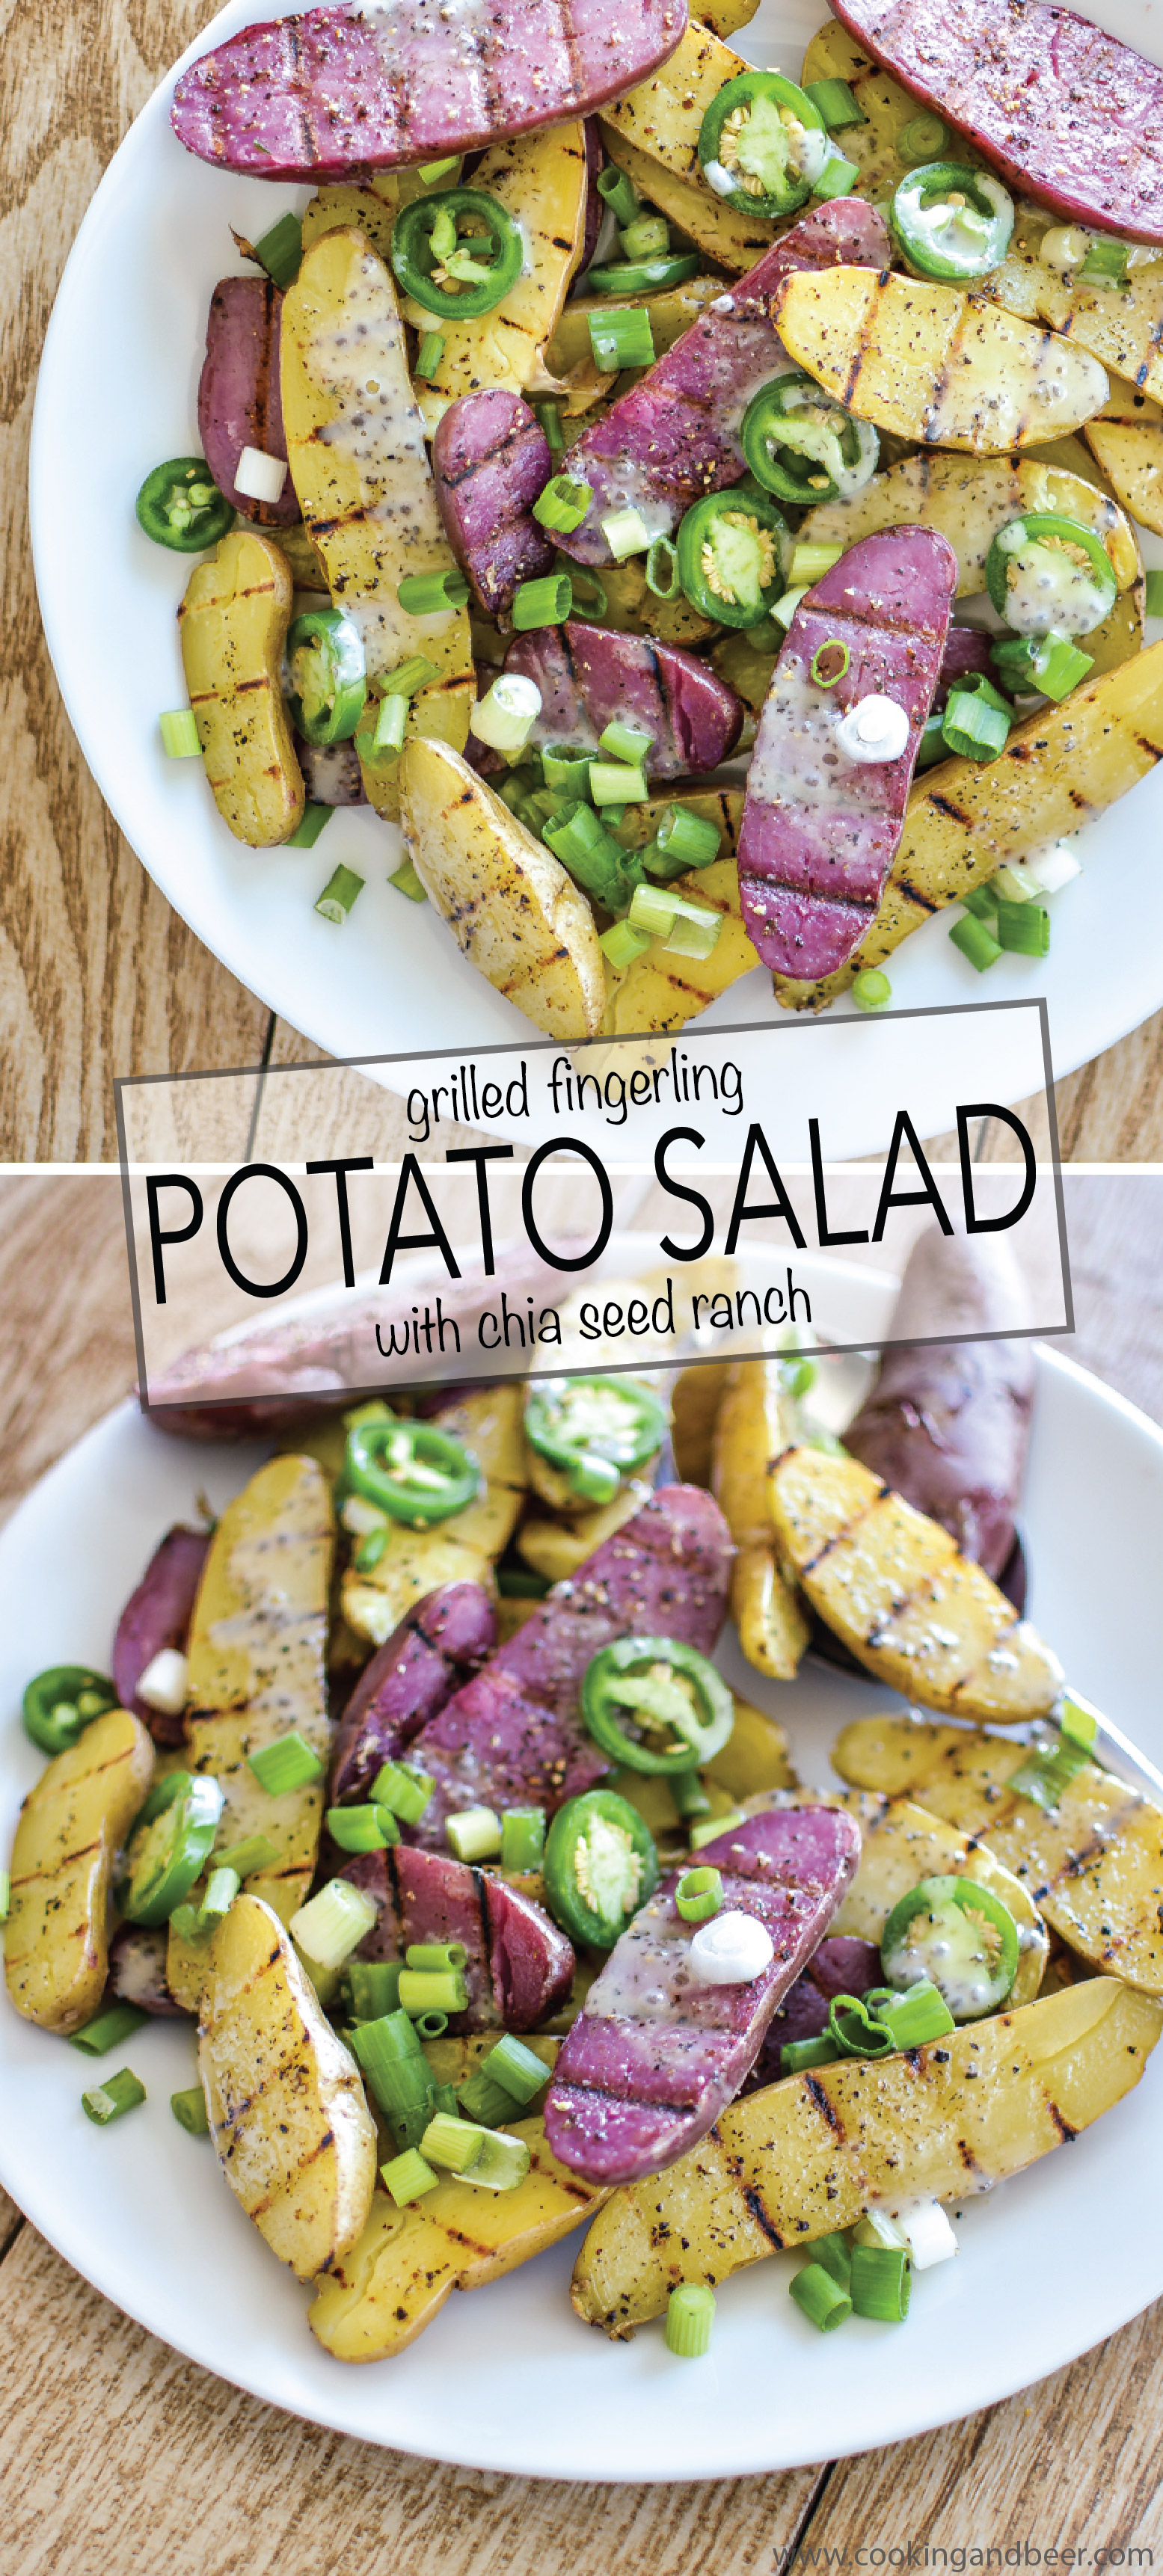 This recipe for grilled fingerling potato salad with chia seed ranch dressing is perfect for your next picnic! | www.cookingandbeer.com